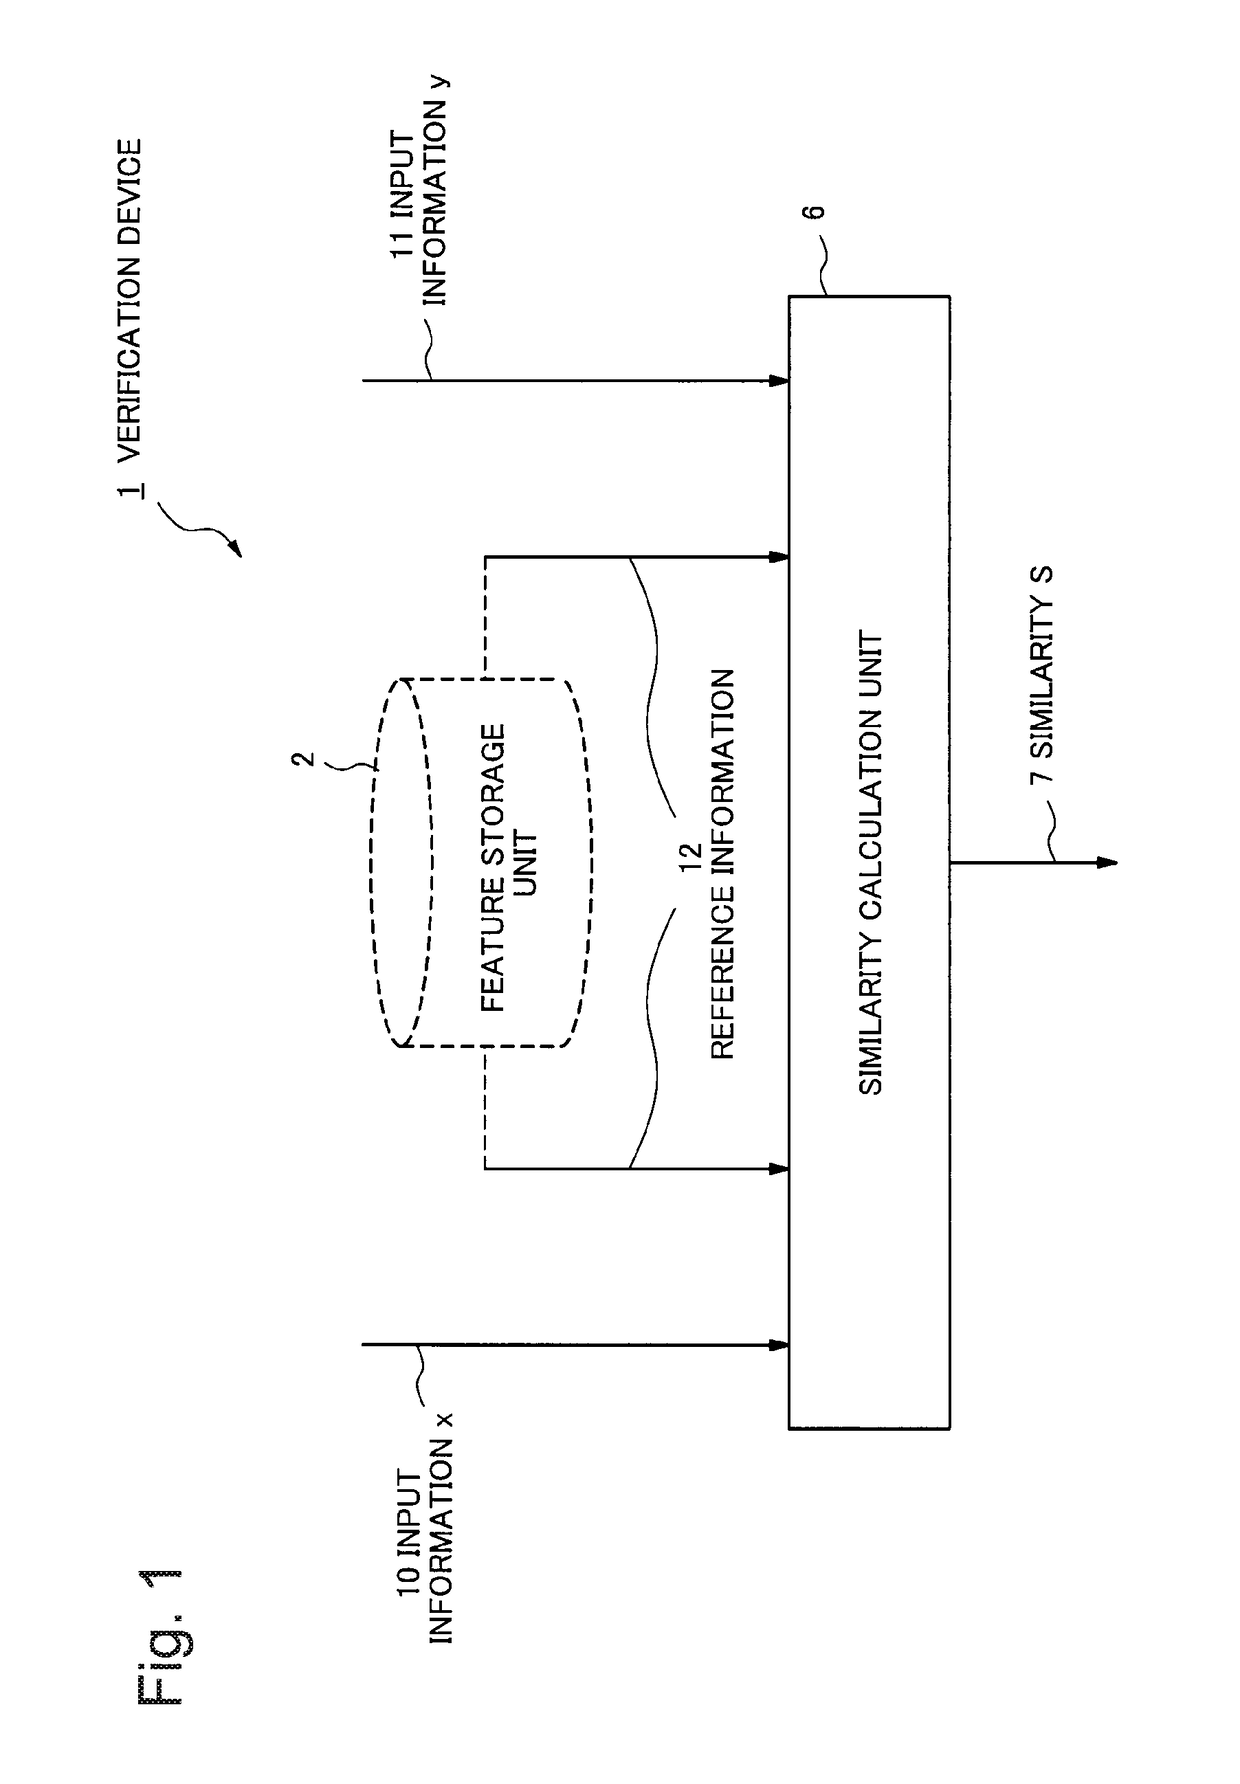 Verification device and control method for verifiction device, as well as computer program